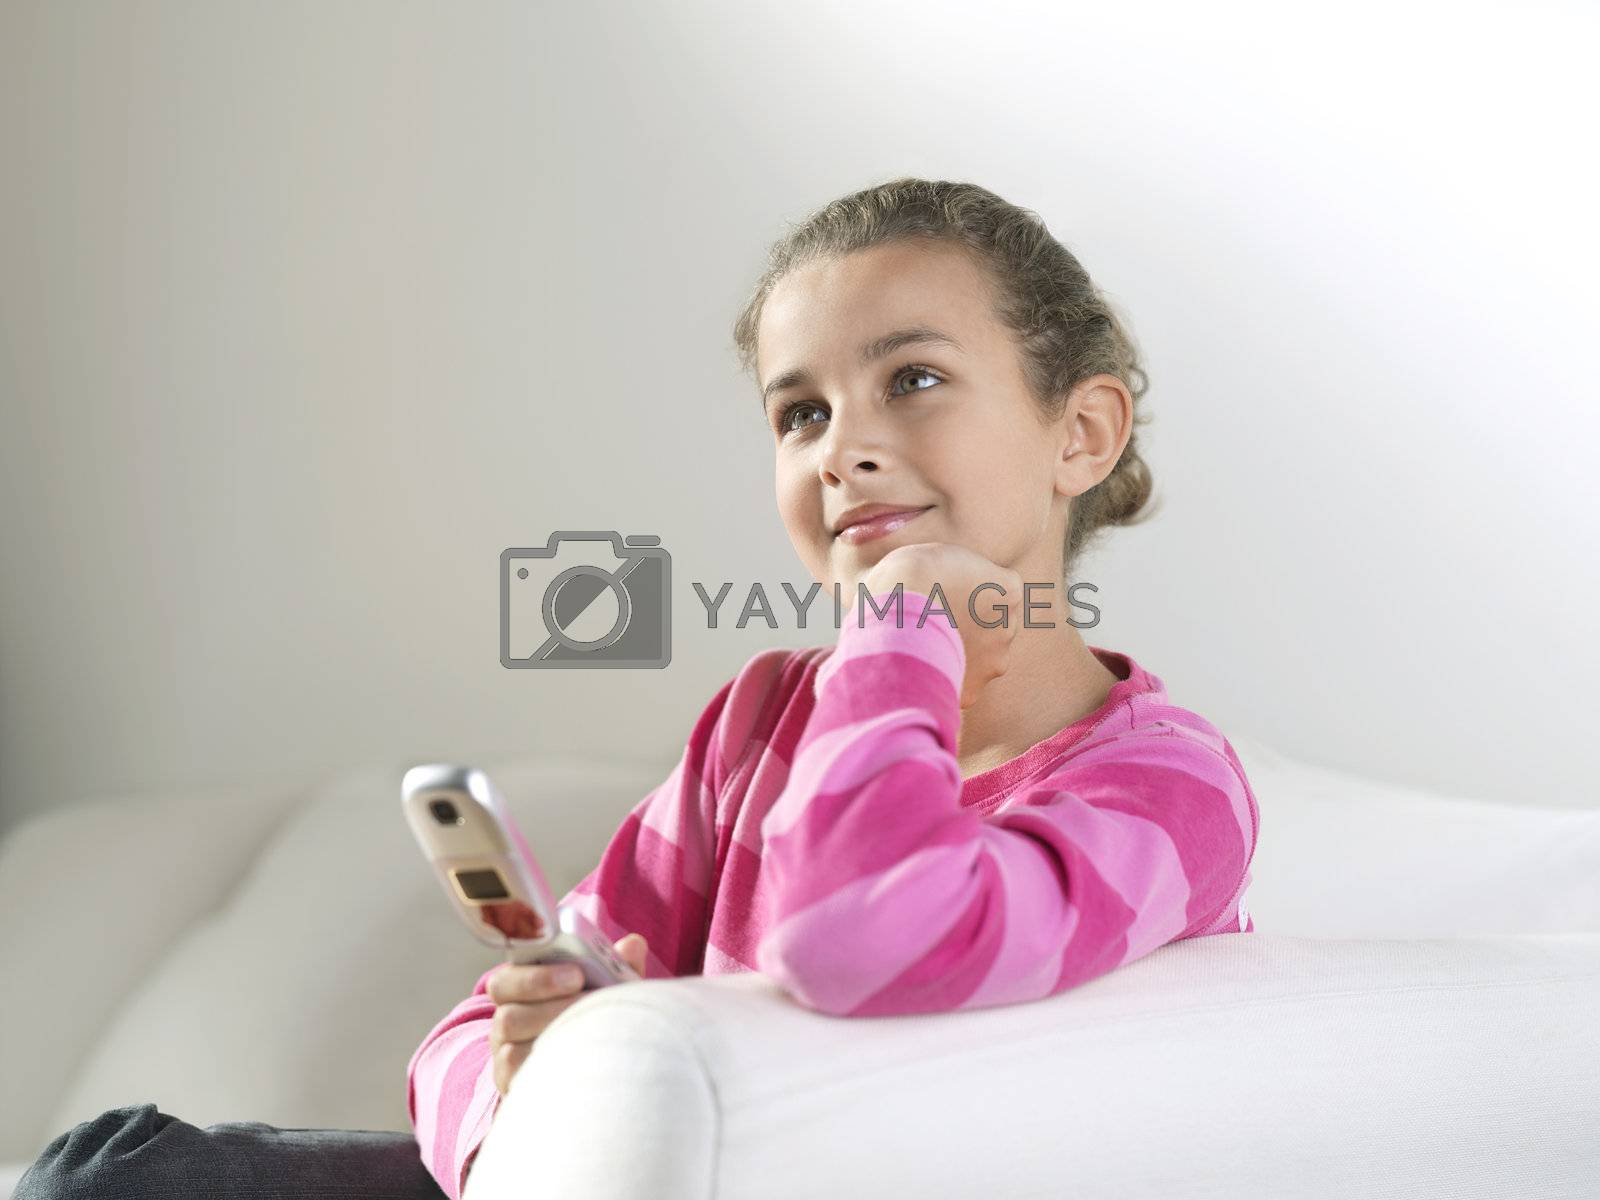 Royalty free image of Young Girl on Cell Phone by moodboard